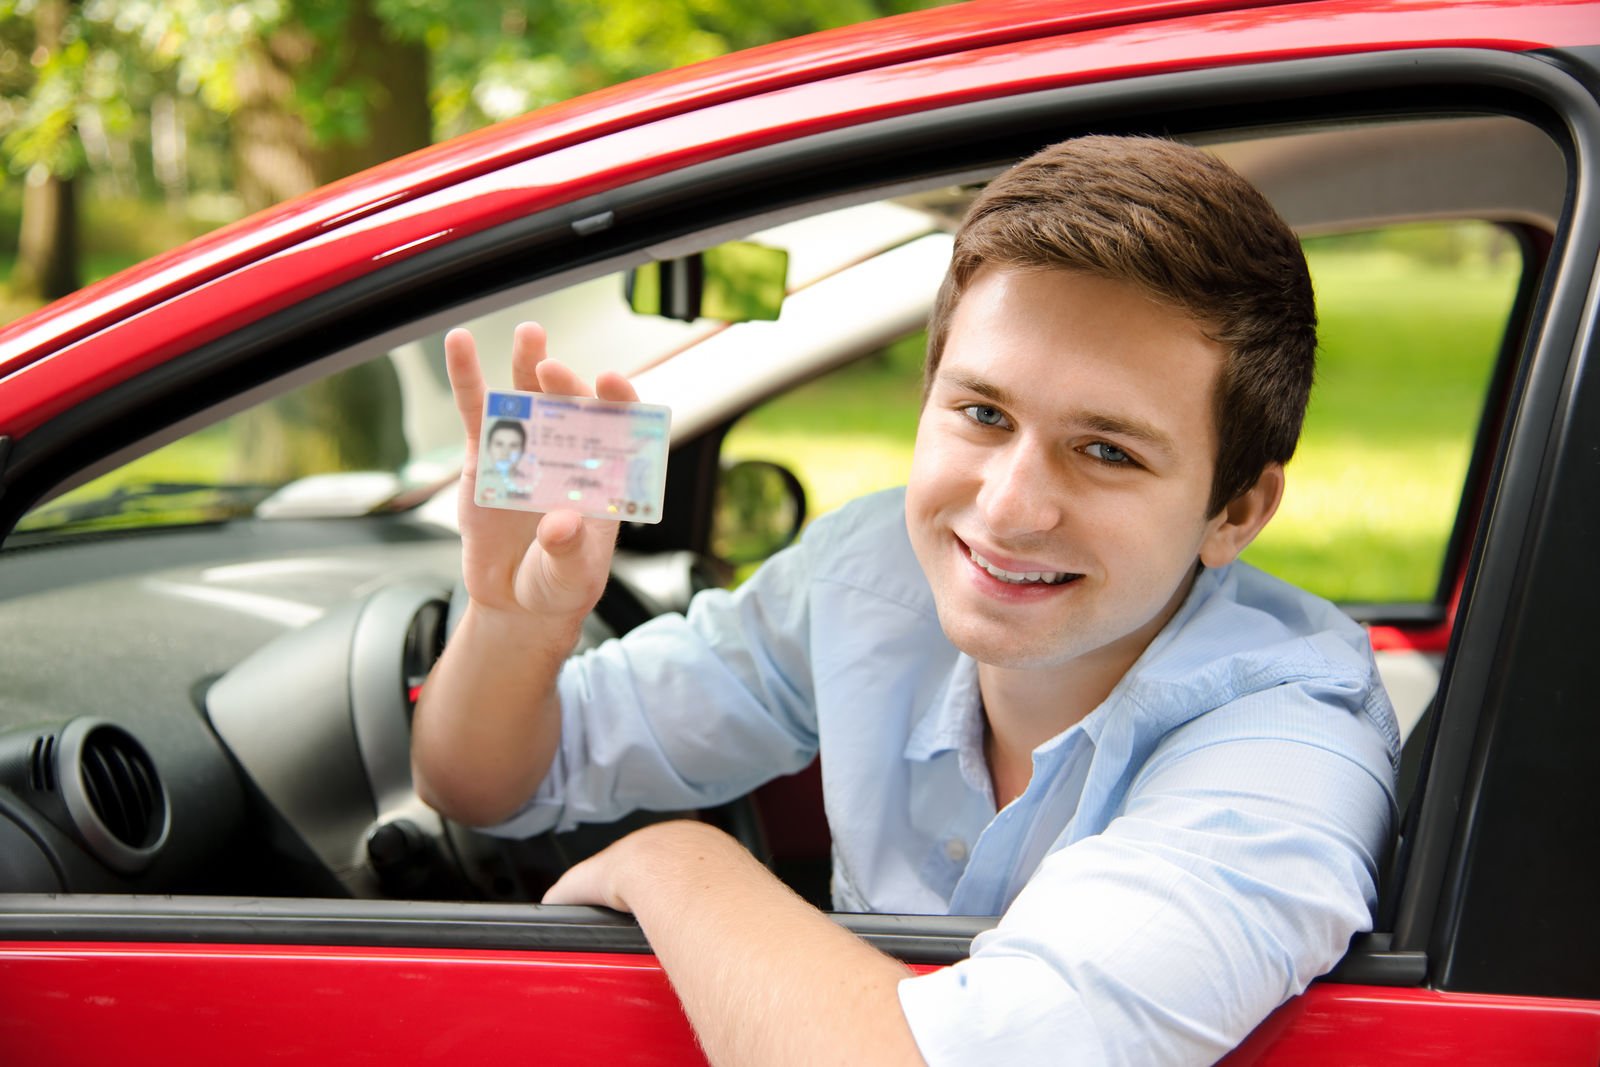 Compare 17-Year-Old Driver Car Insurance Rates [2023]